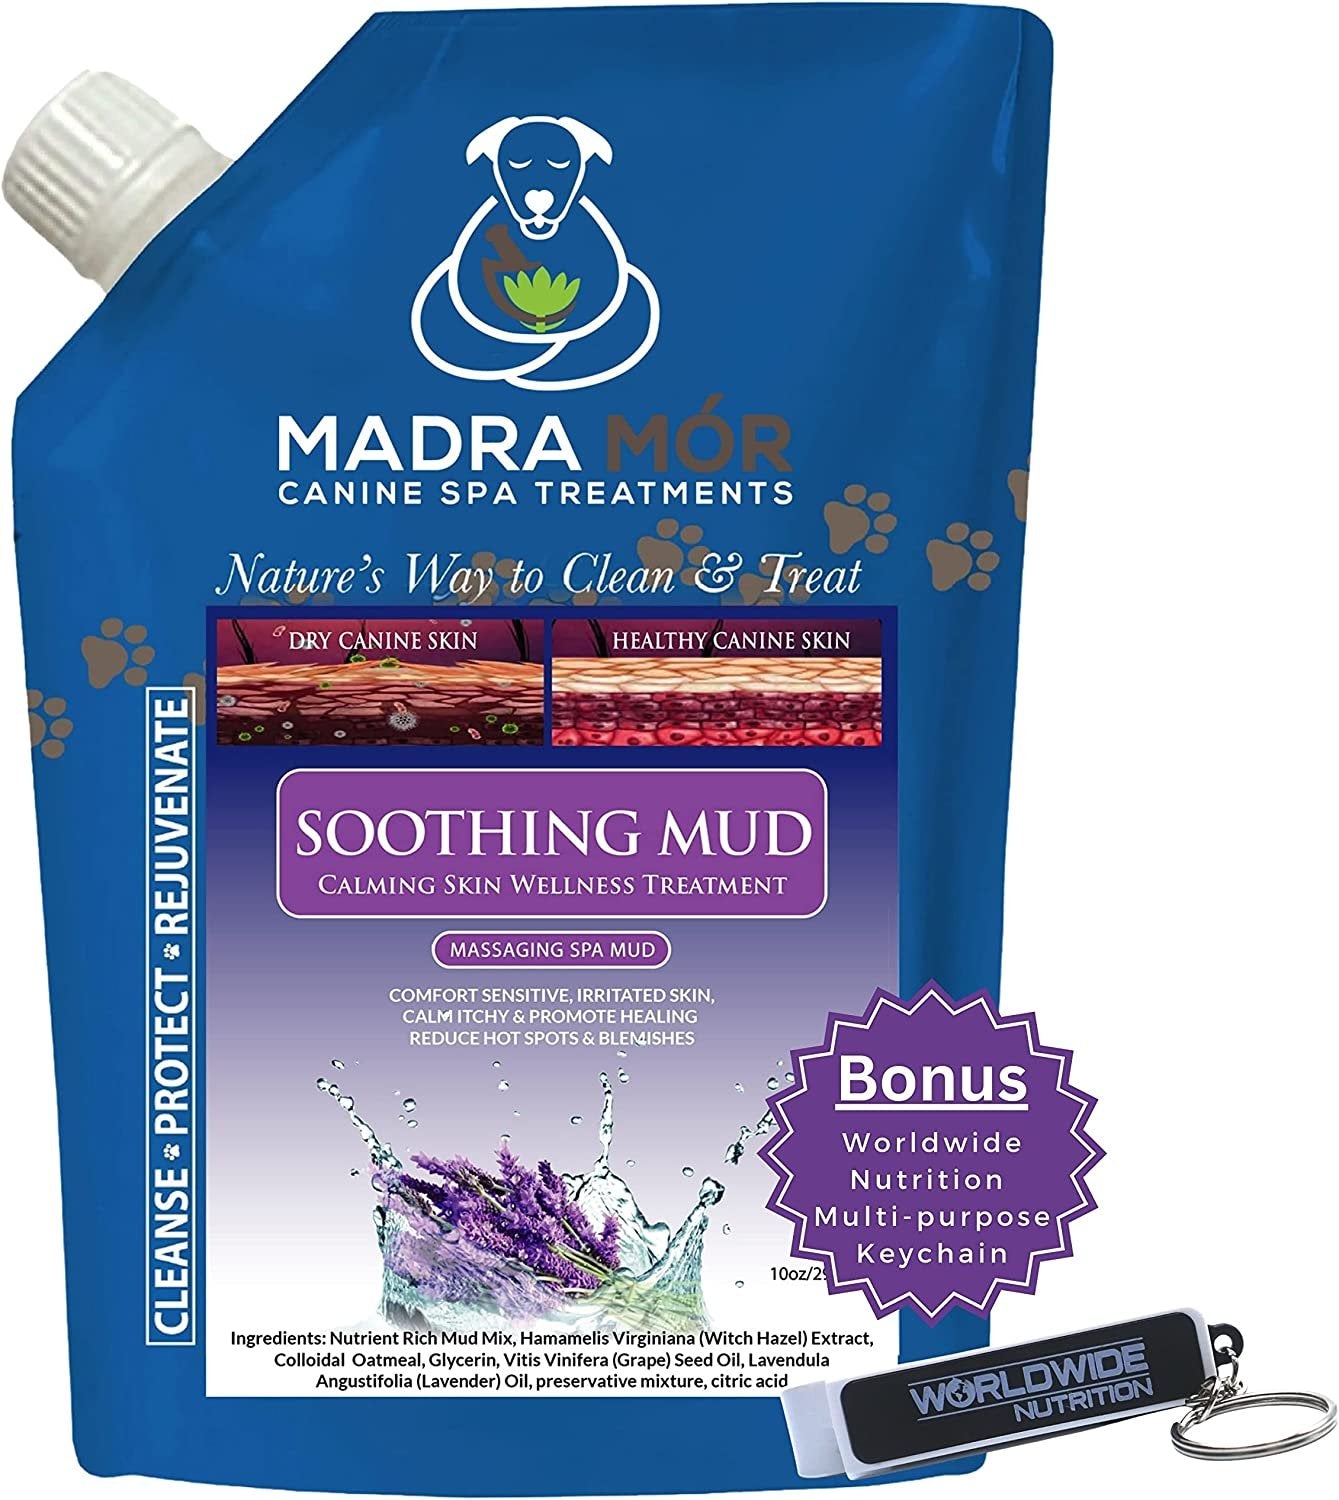 Madra Mor Massaging SPA Mud - Luxurious Dog Skin Wellness Treatment - Cleanse - Protect - Rejuvenate - Soothing Mud - 1 Pack (10oz) - with Multi-Purpose Key Chain